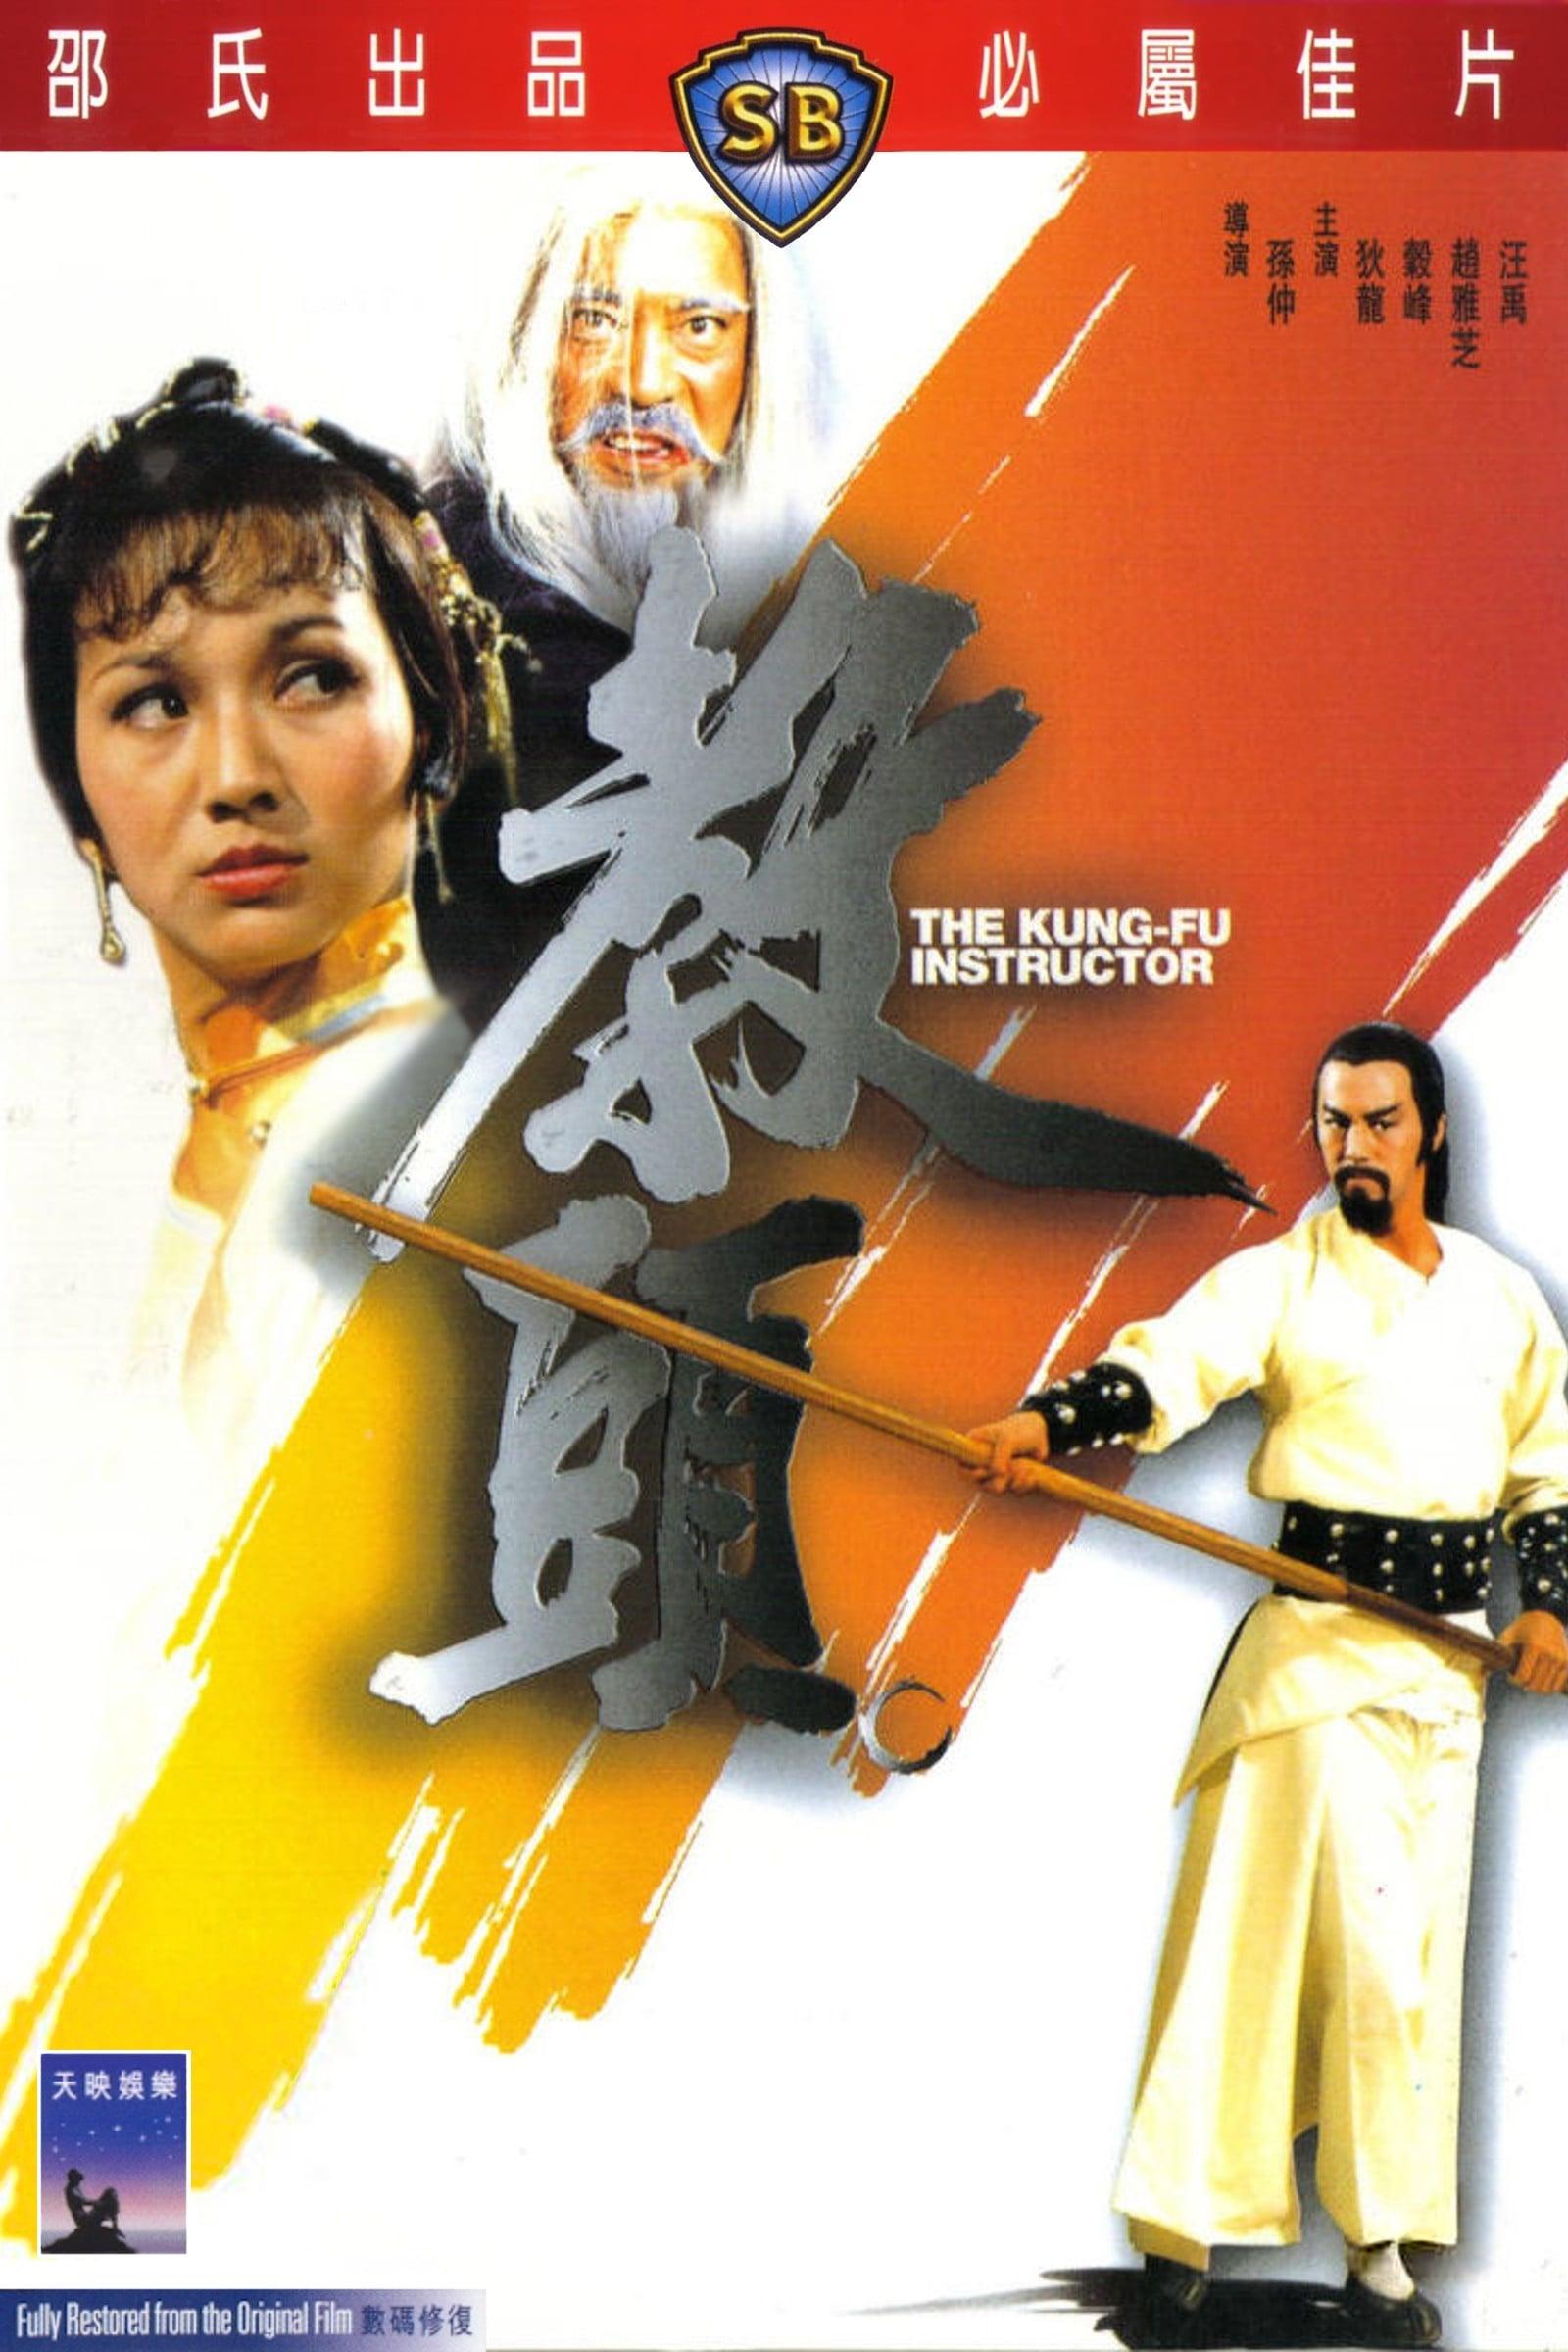 The Kung Fu Instructor poster